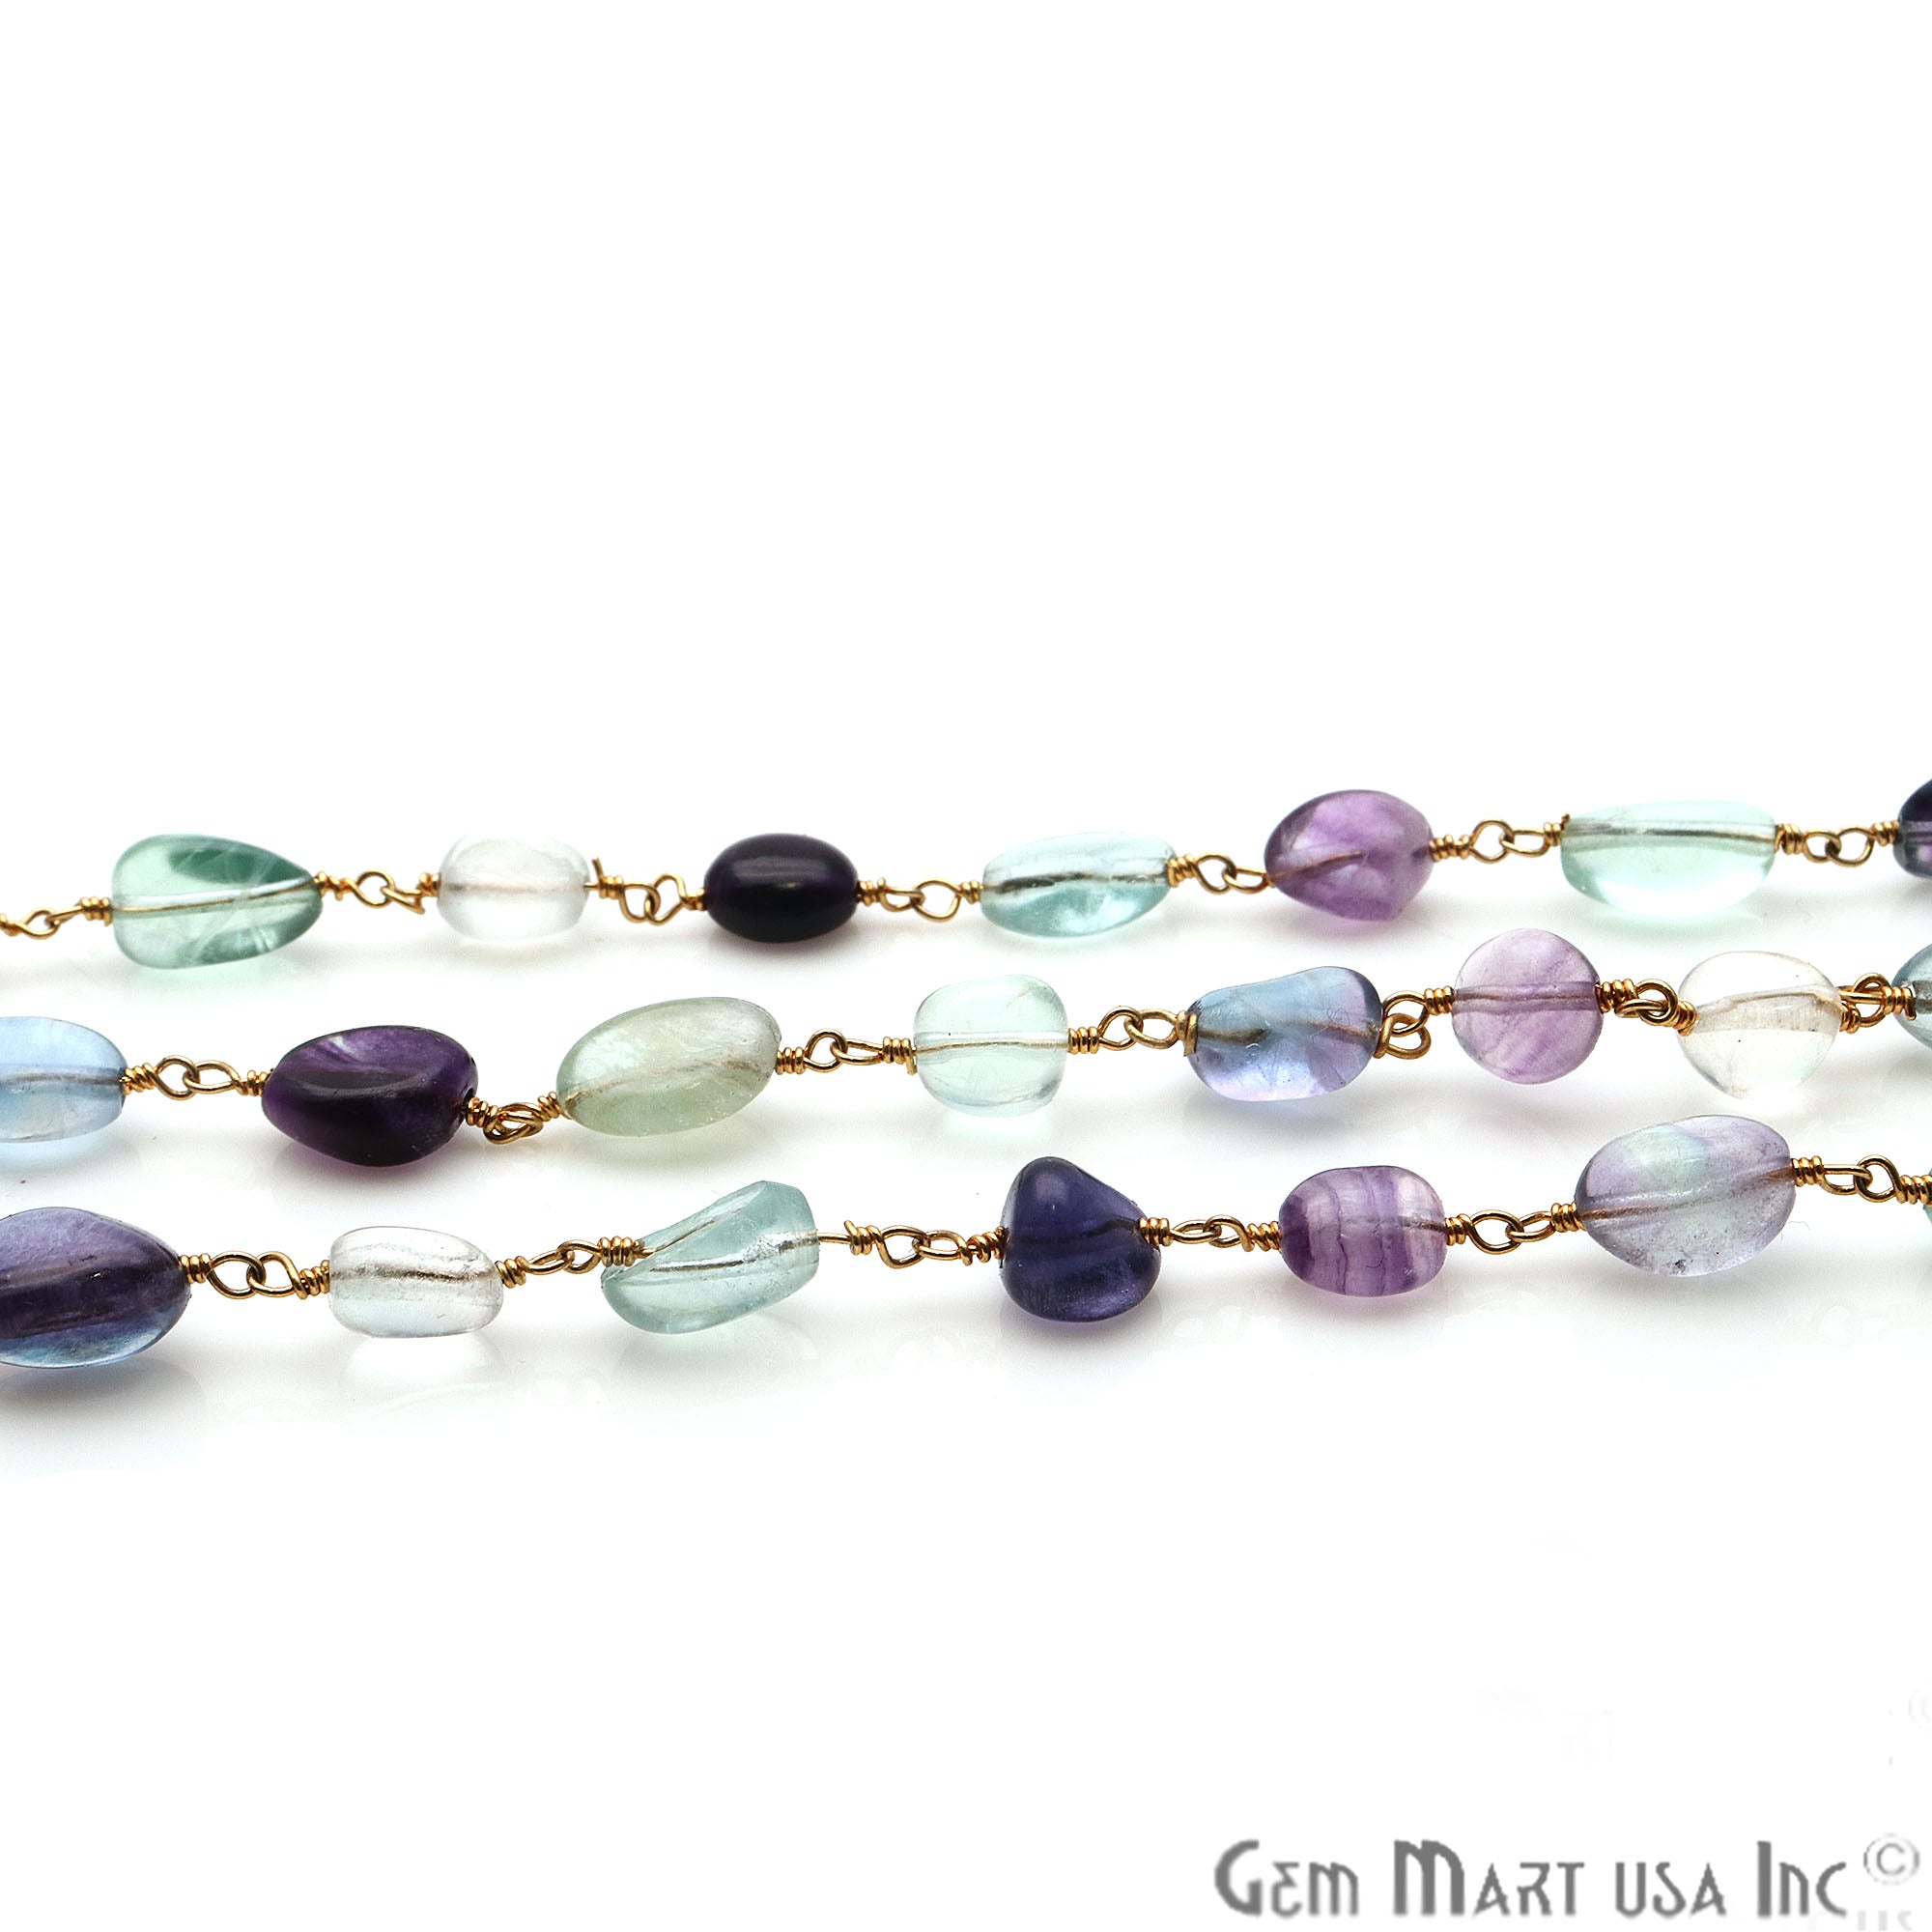 Dark Fluorite Tumble Beads 10x6mm Gold Plated Wire Wrapped Rosary Chain - GemMartUSA